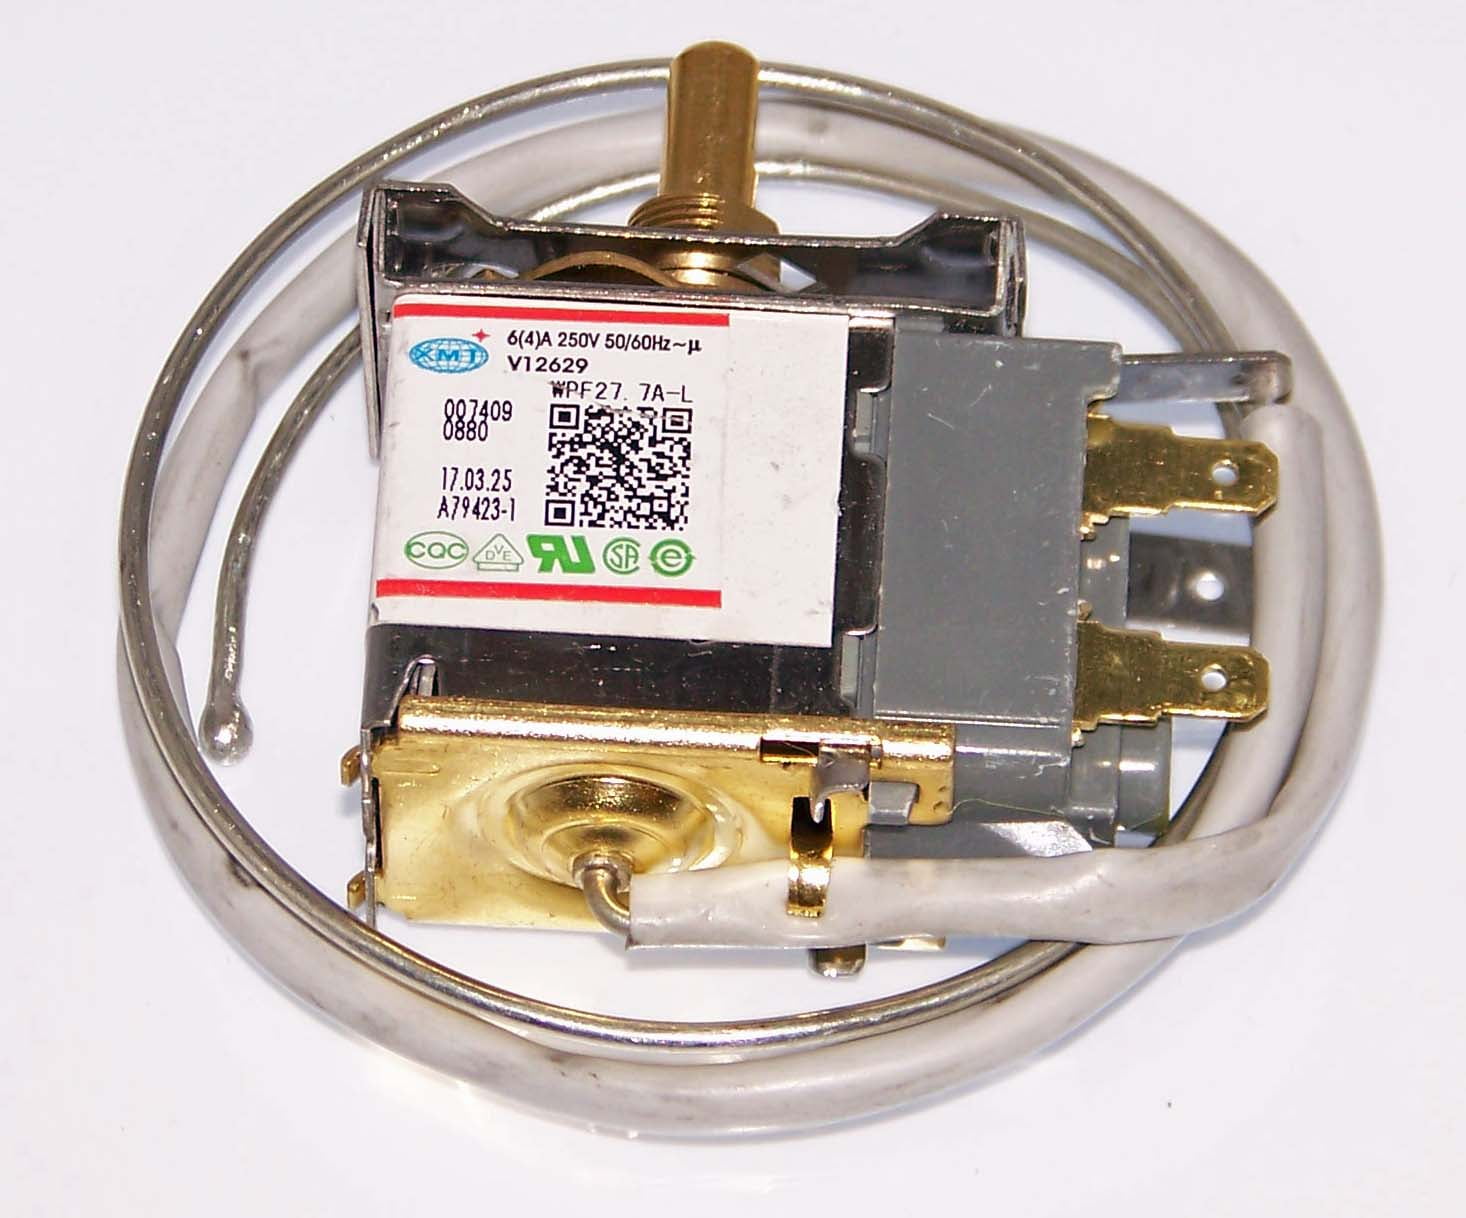 RF-7350-350 OEM Thermostat for Haier 